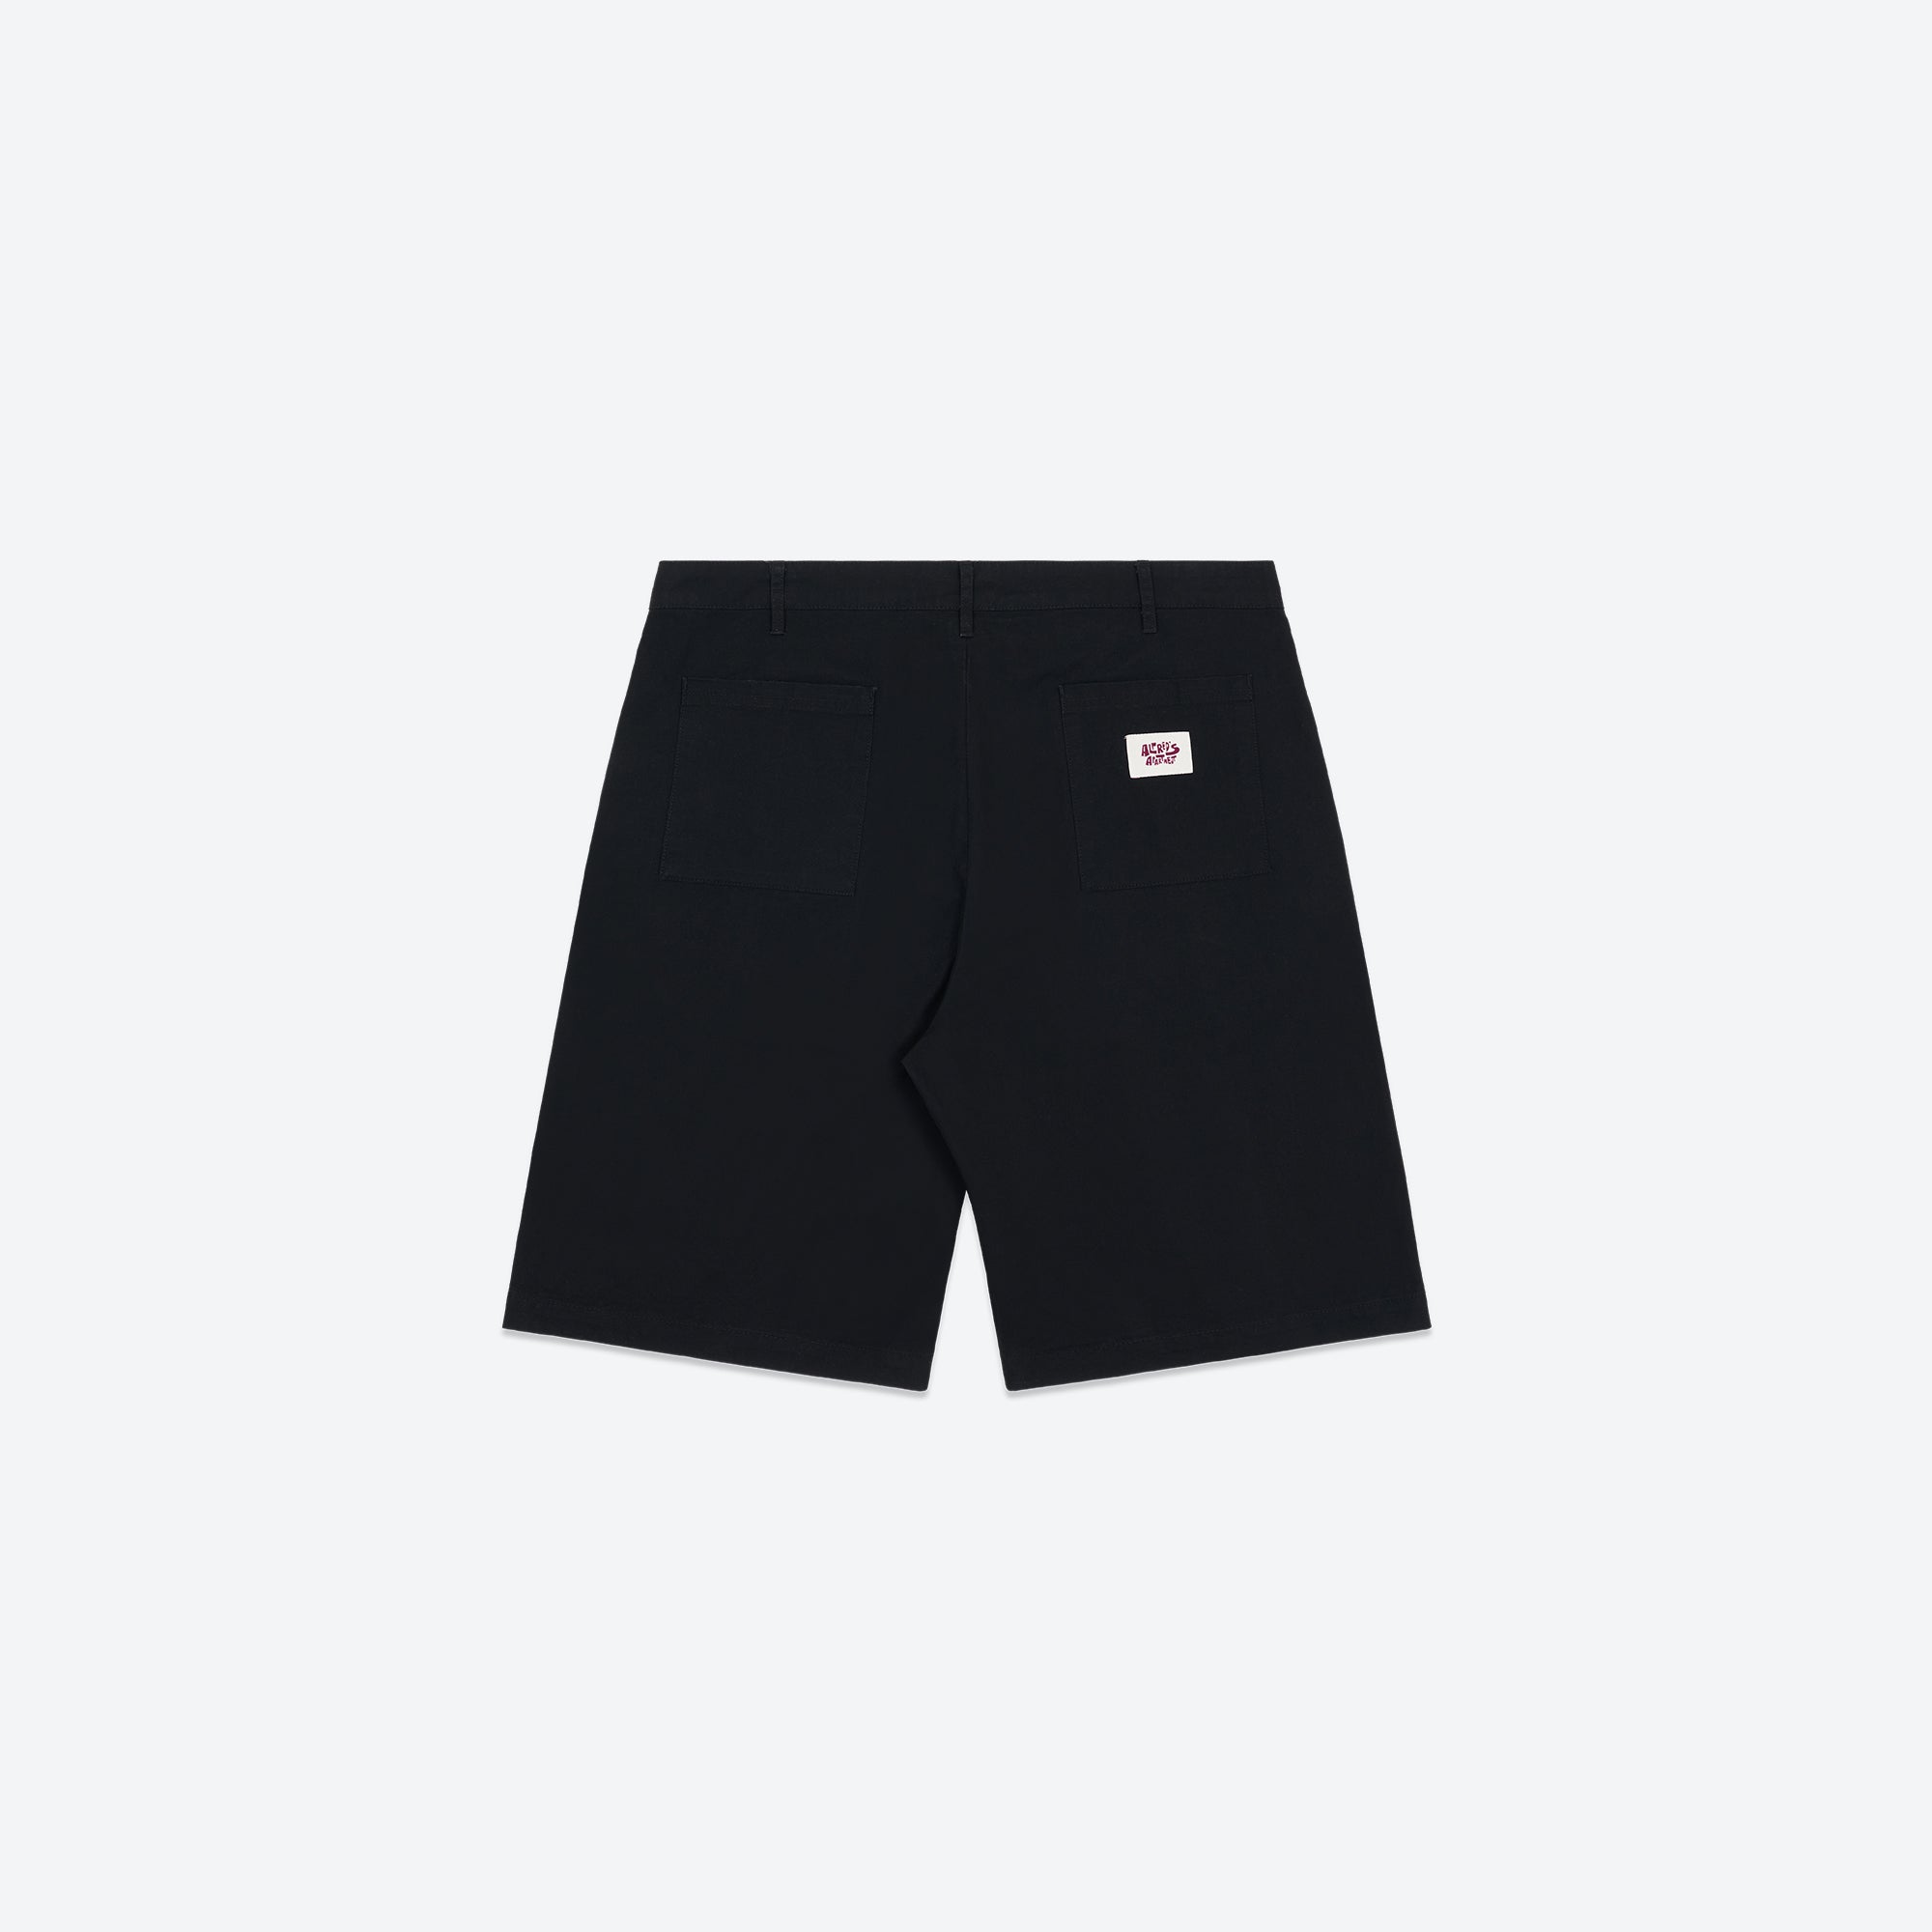 Alfred's Apartment - Paradise Pleated Short - Black